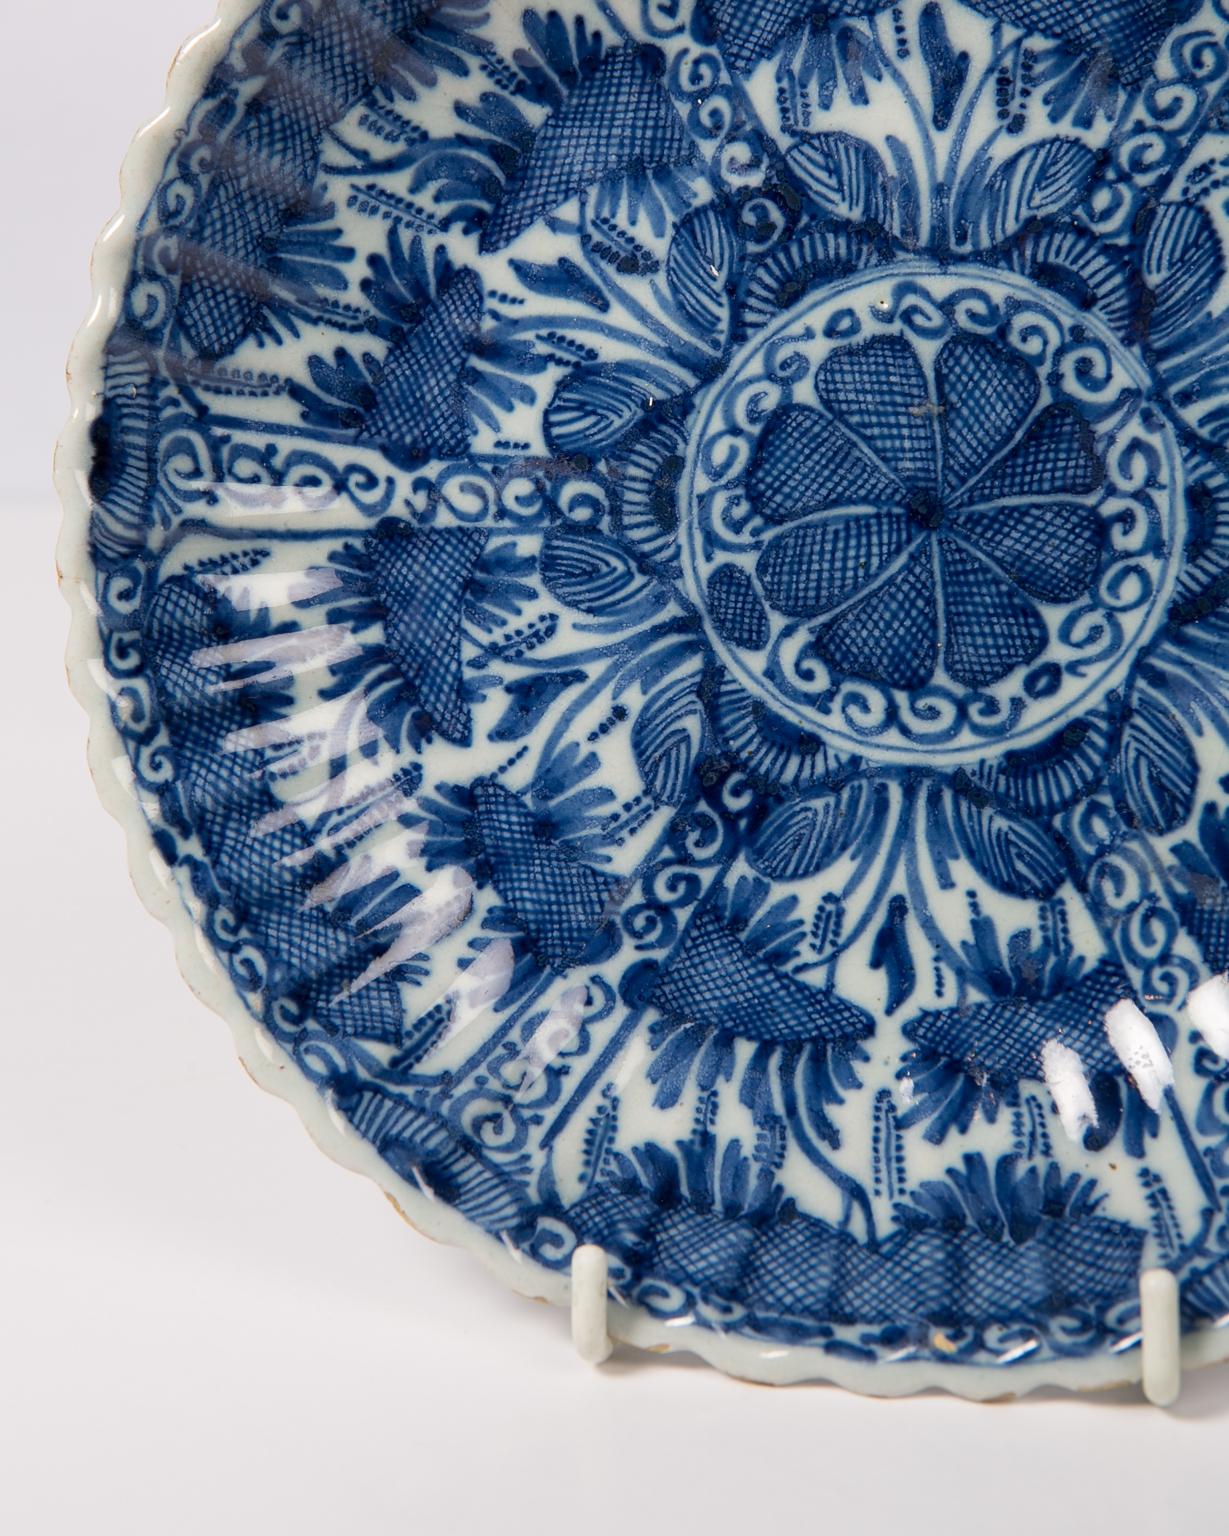 18th Century Antique Delft Blue and White Dish with Fluting and a Scalloped Edge circa 1780